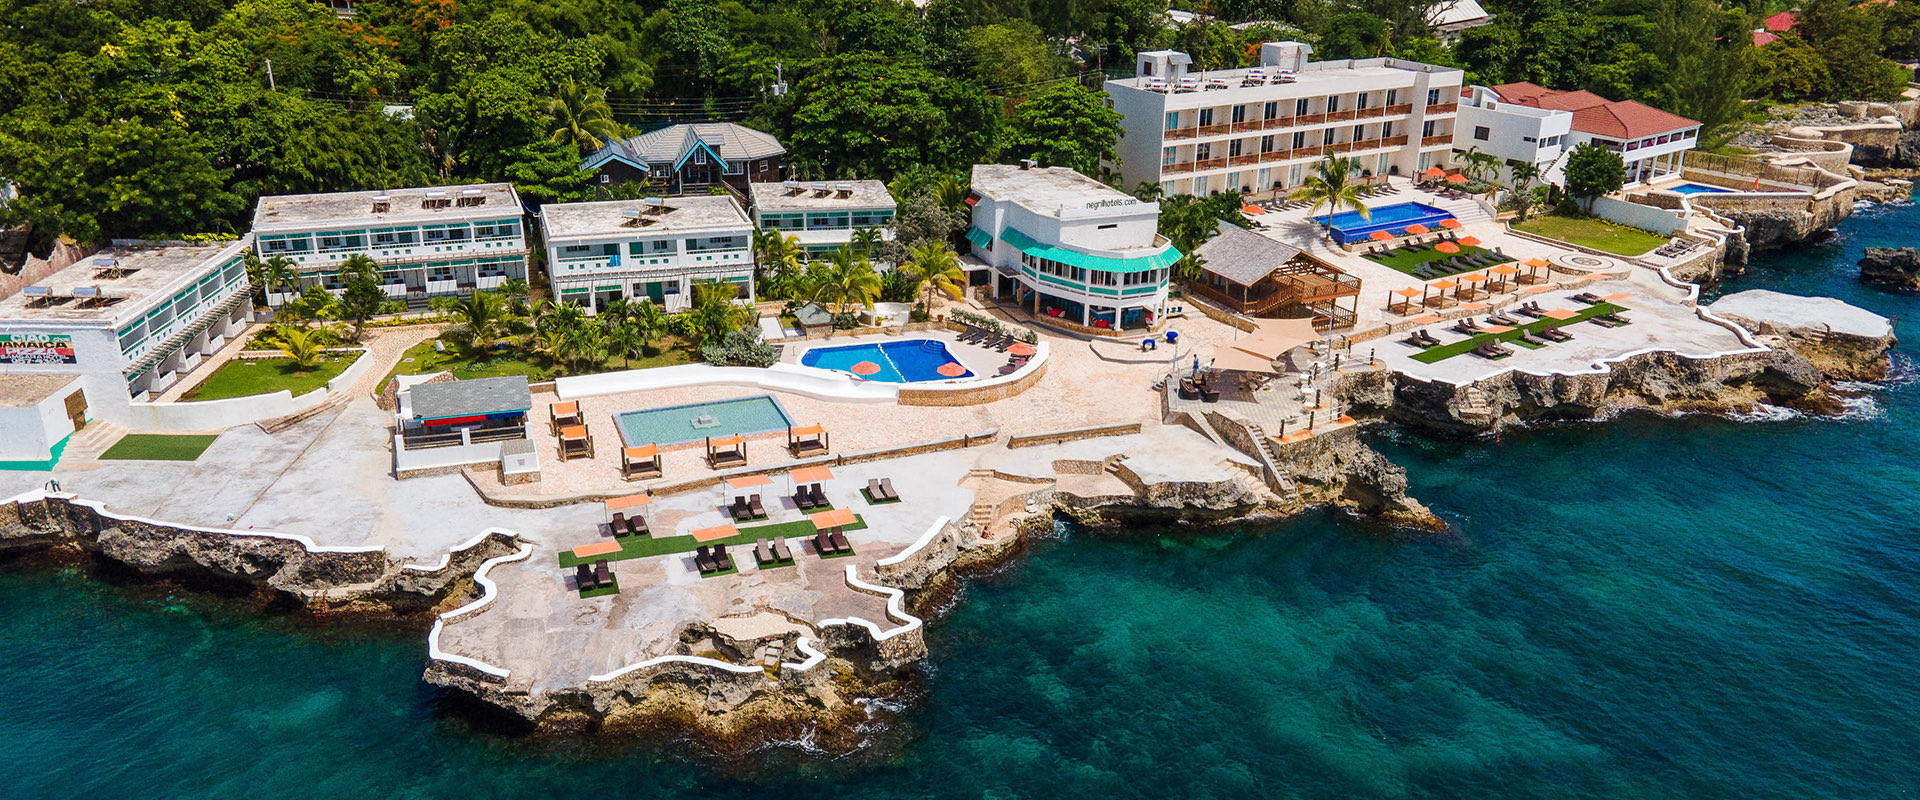 aerial view of resort property including guest lodging, pools, and lounge areas with ocean view